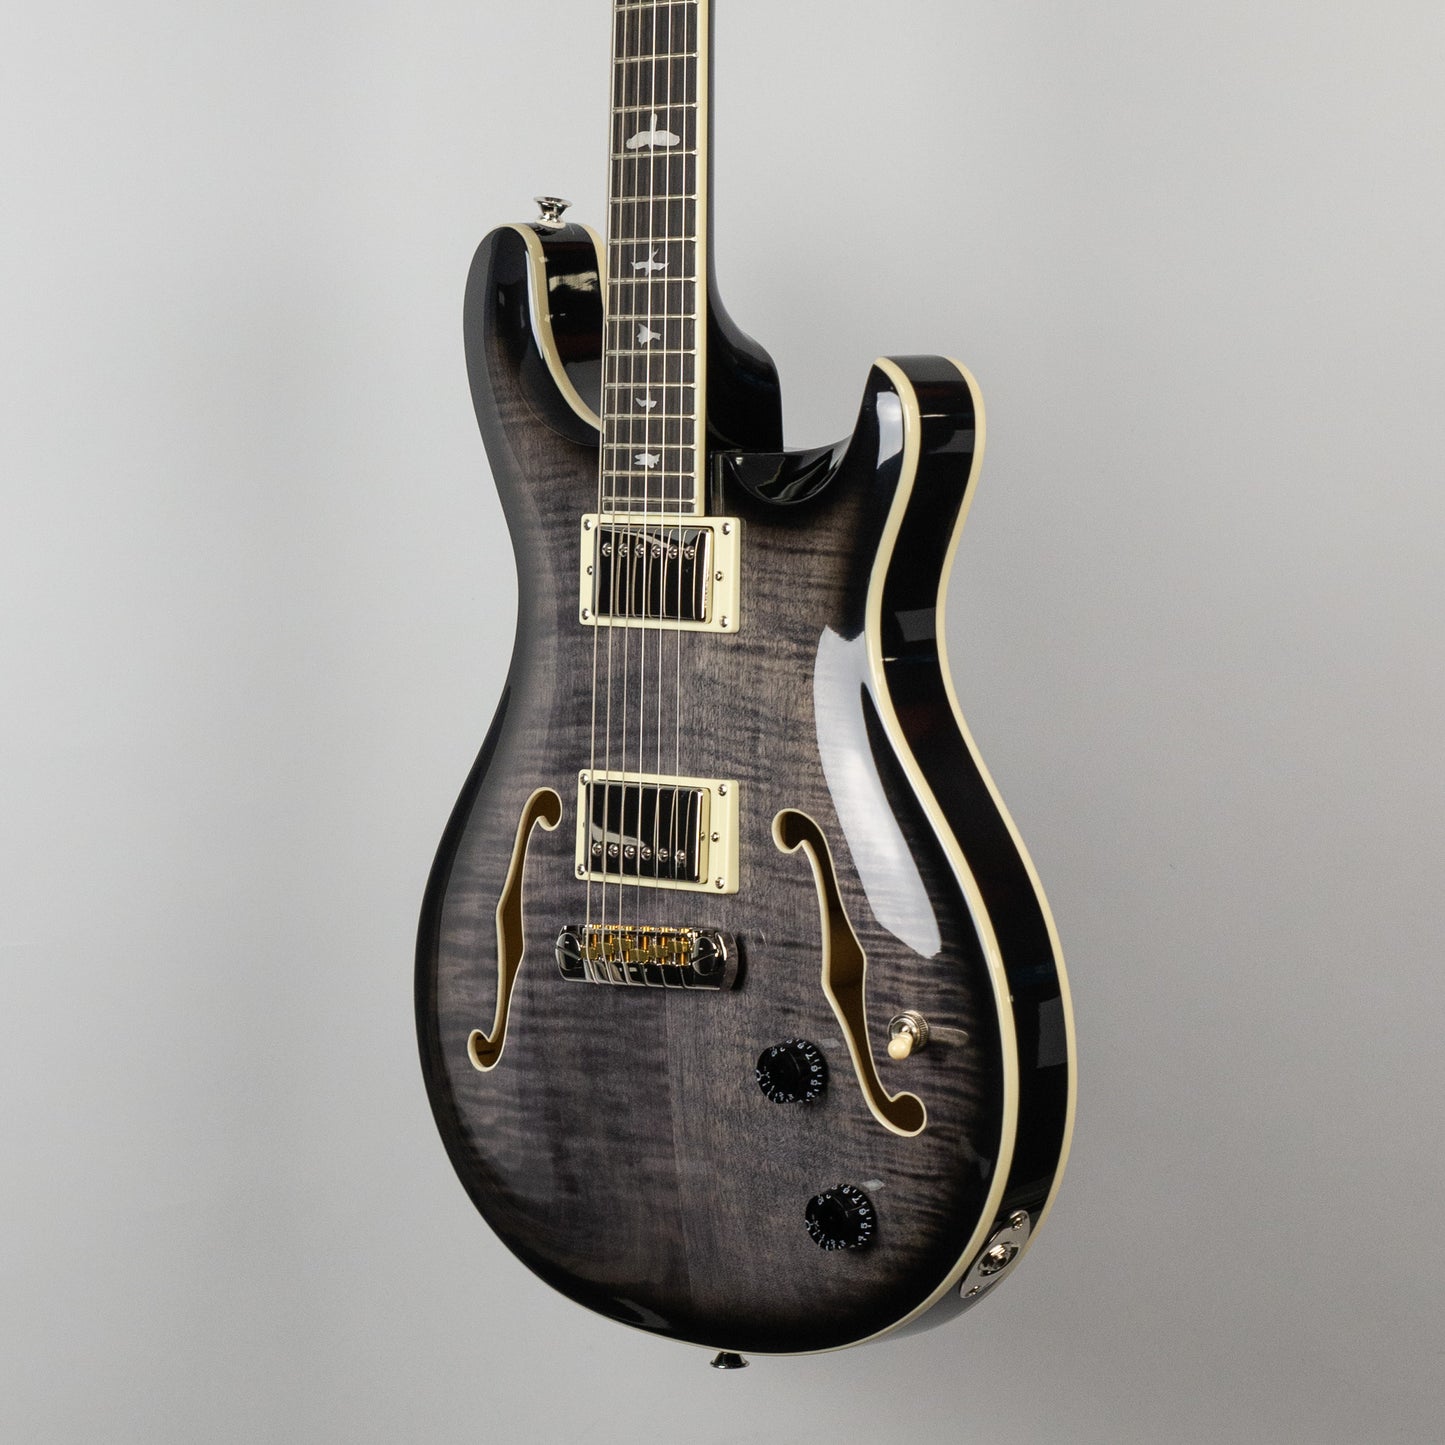 Paul Reed Smith SE Hollowbody II in Charcoal Burst